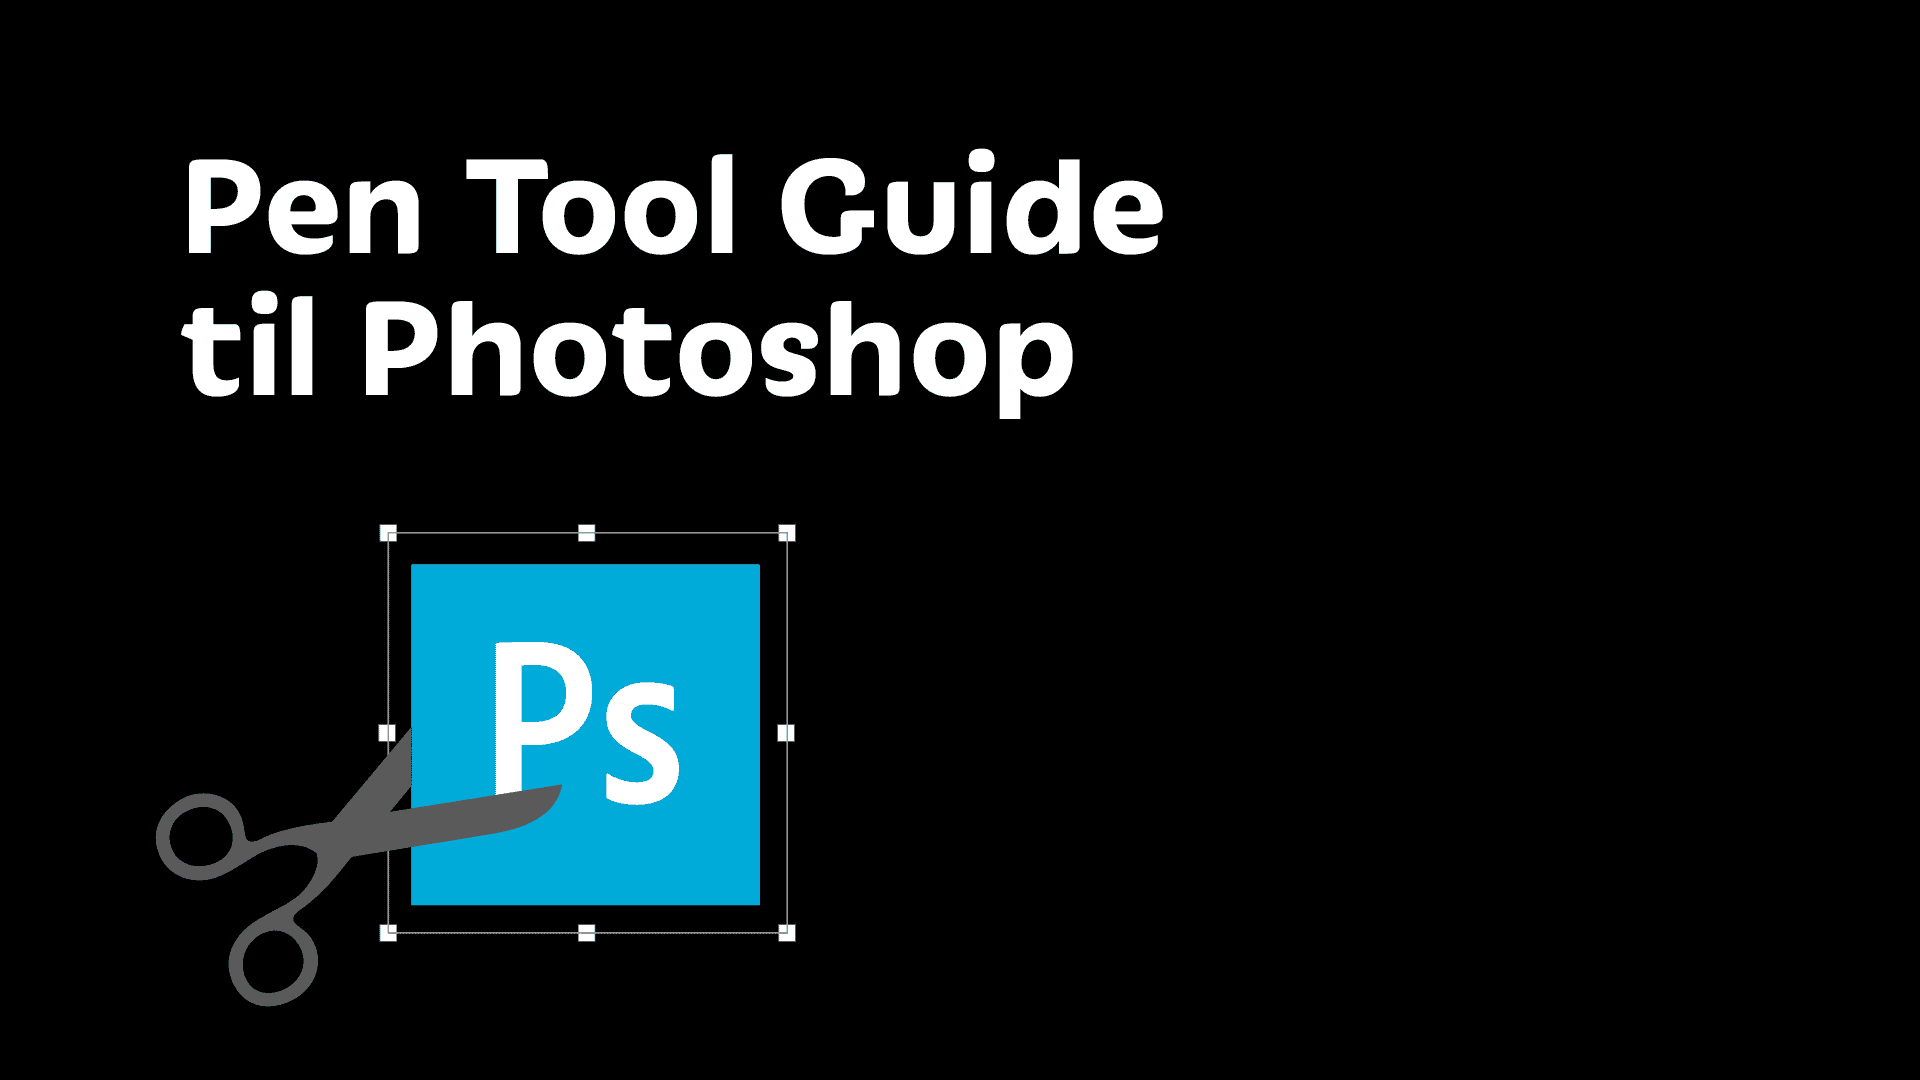 pen tool guide photoshop